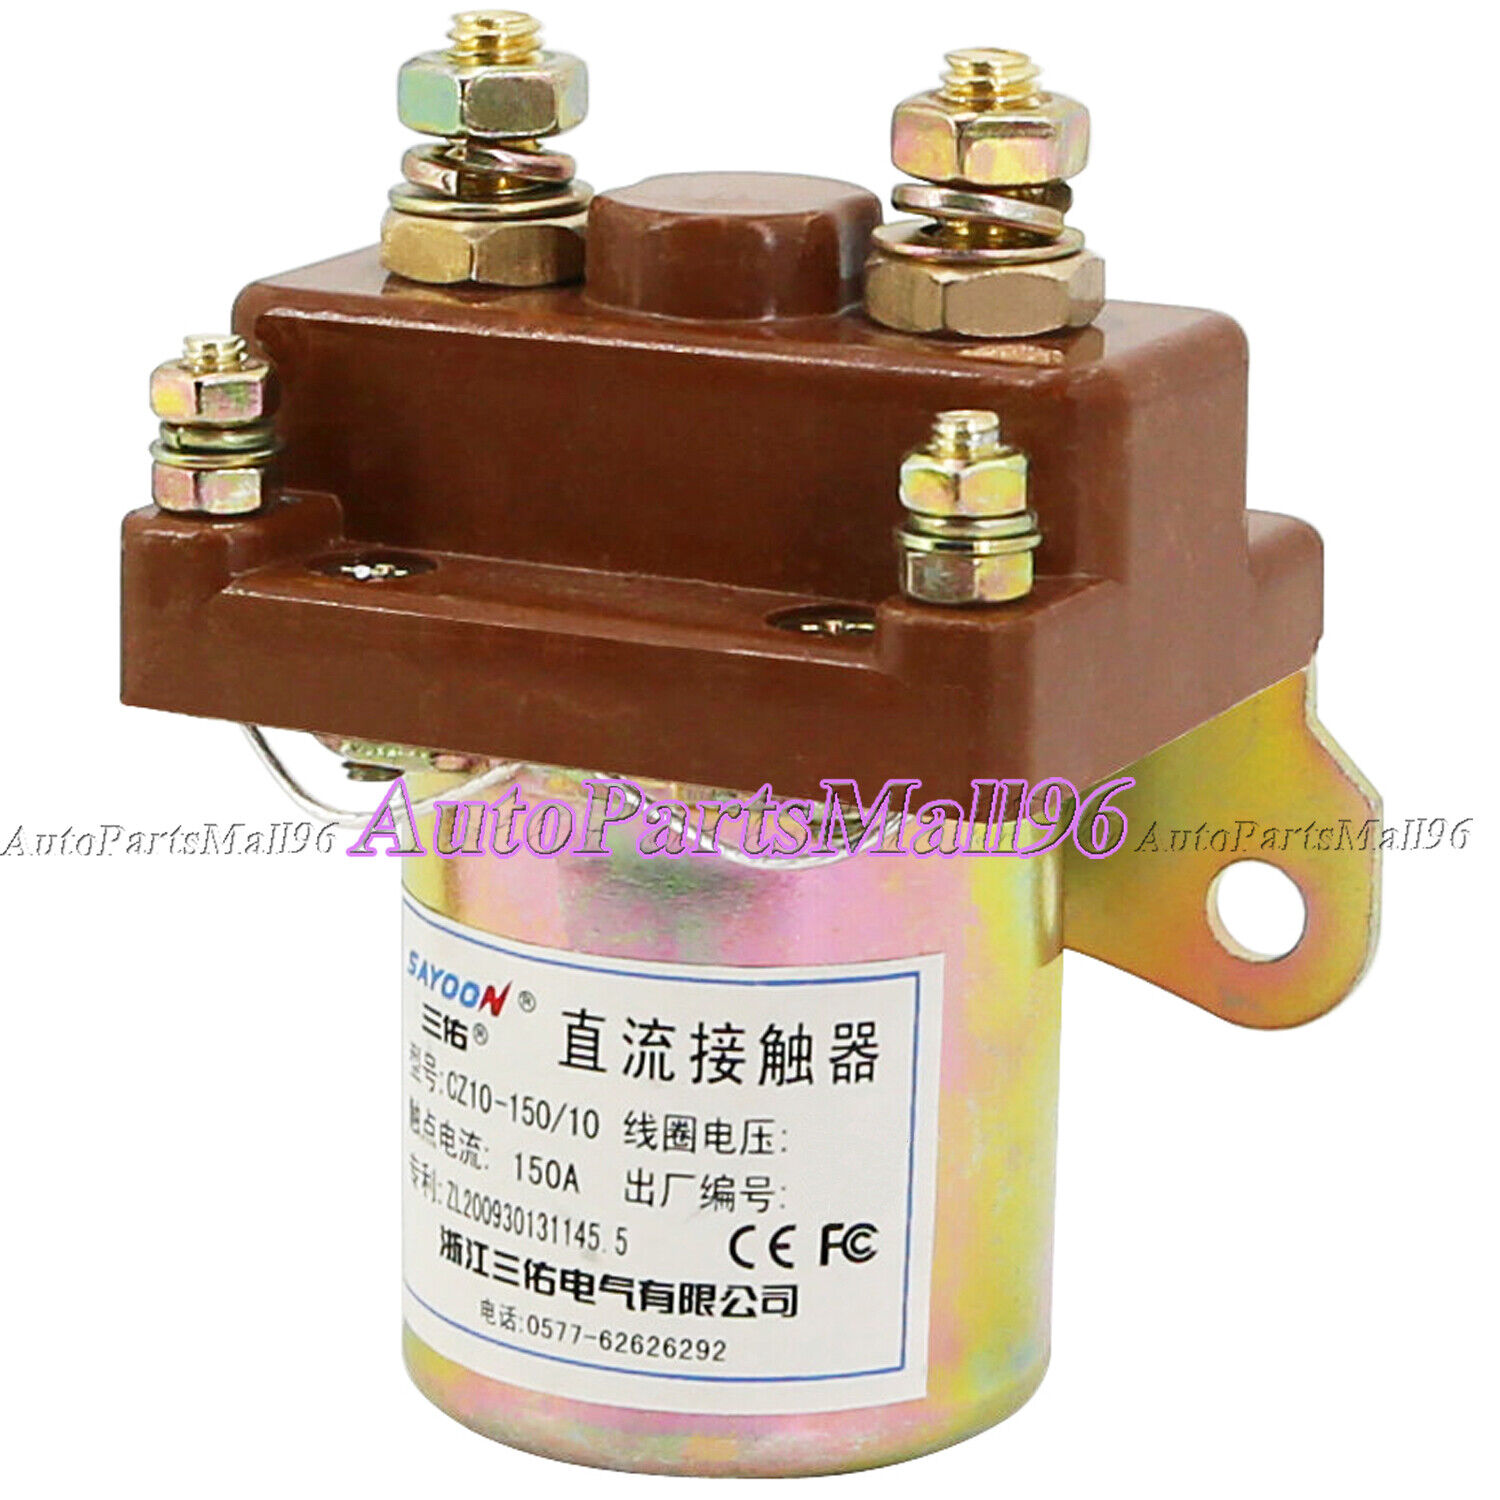 New 1pc CZ10-150/10 Heavy Duty 12V 150A DC Contactor Solenoid